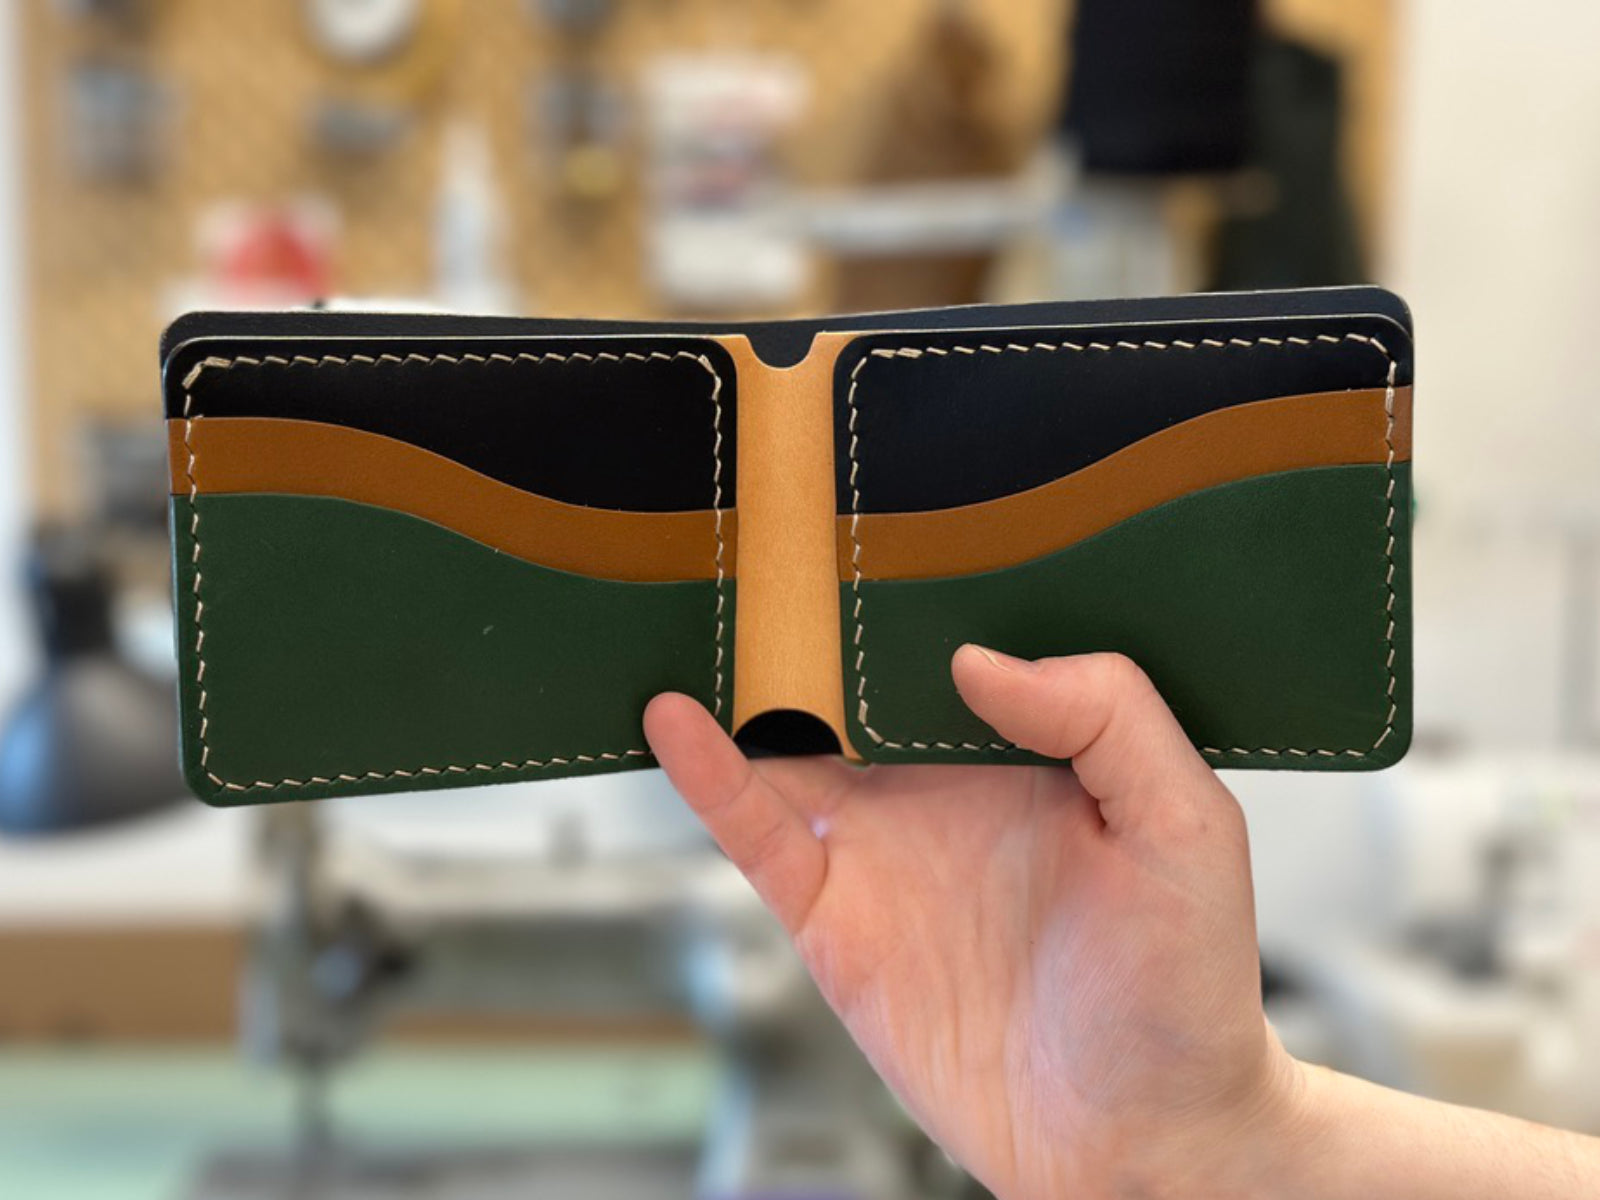 Custom build your own leather bucklaw wallet in pine, tan, black and russet